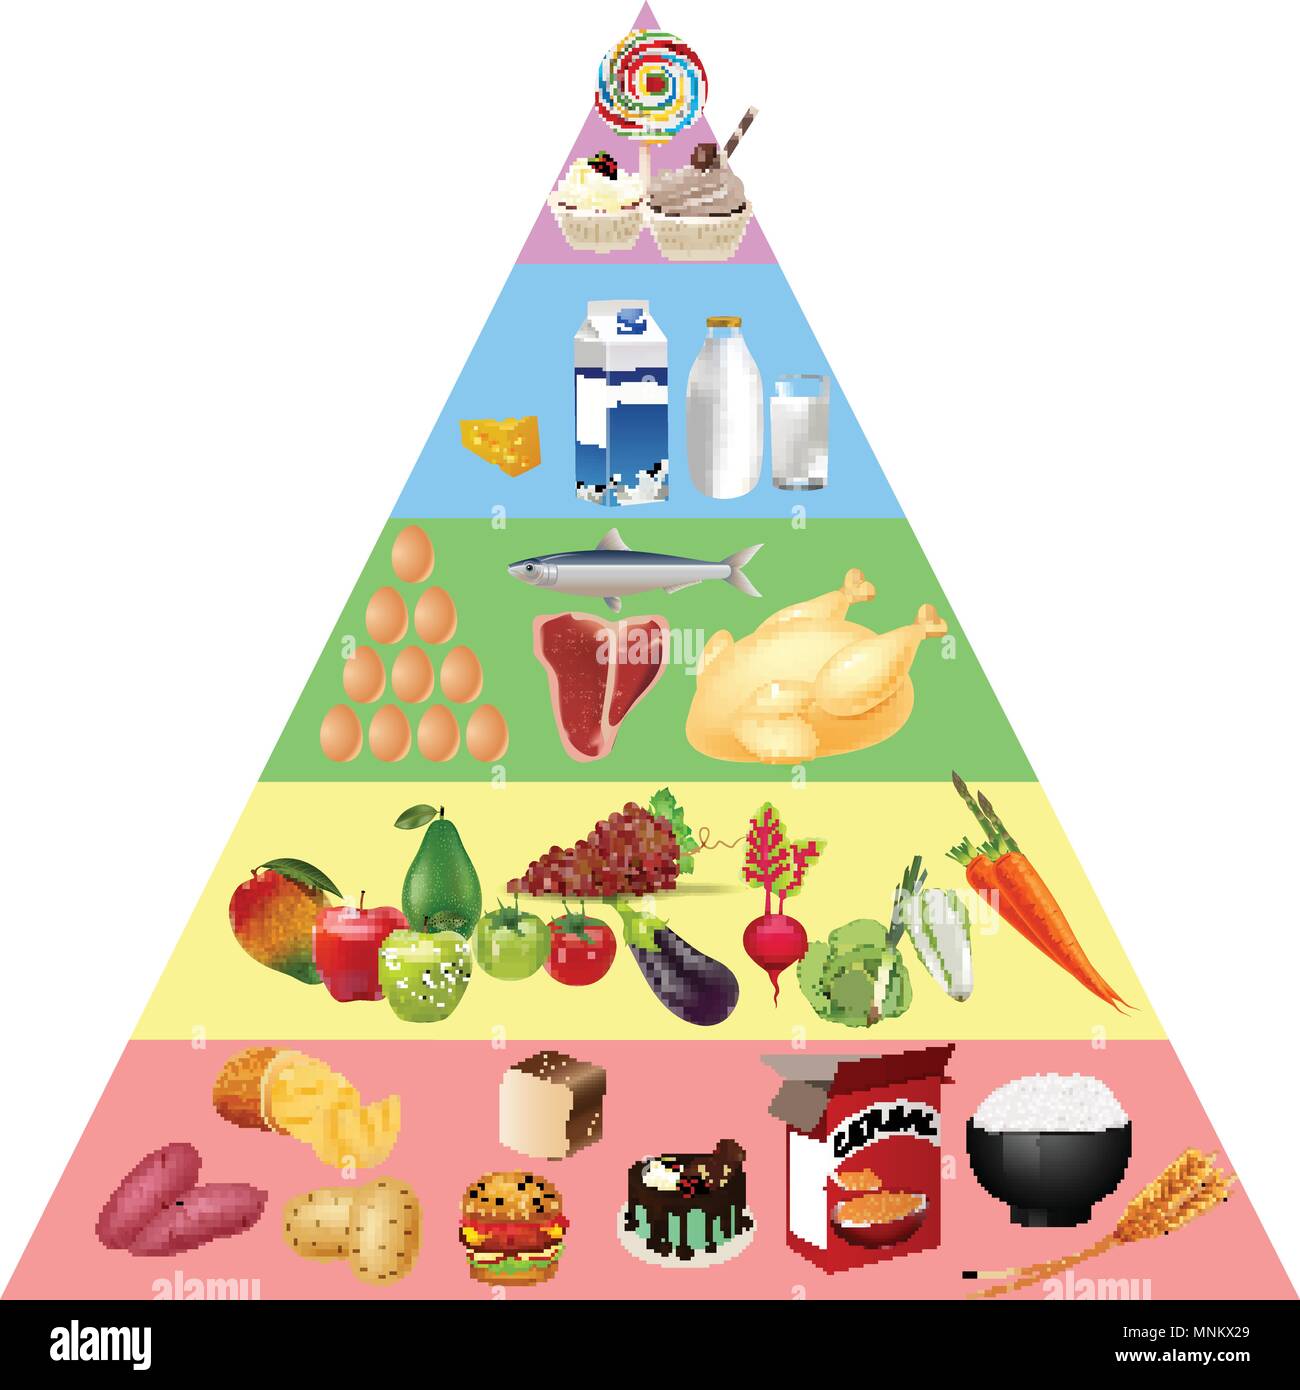 Food Hierarchy Chart